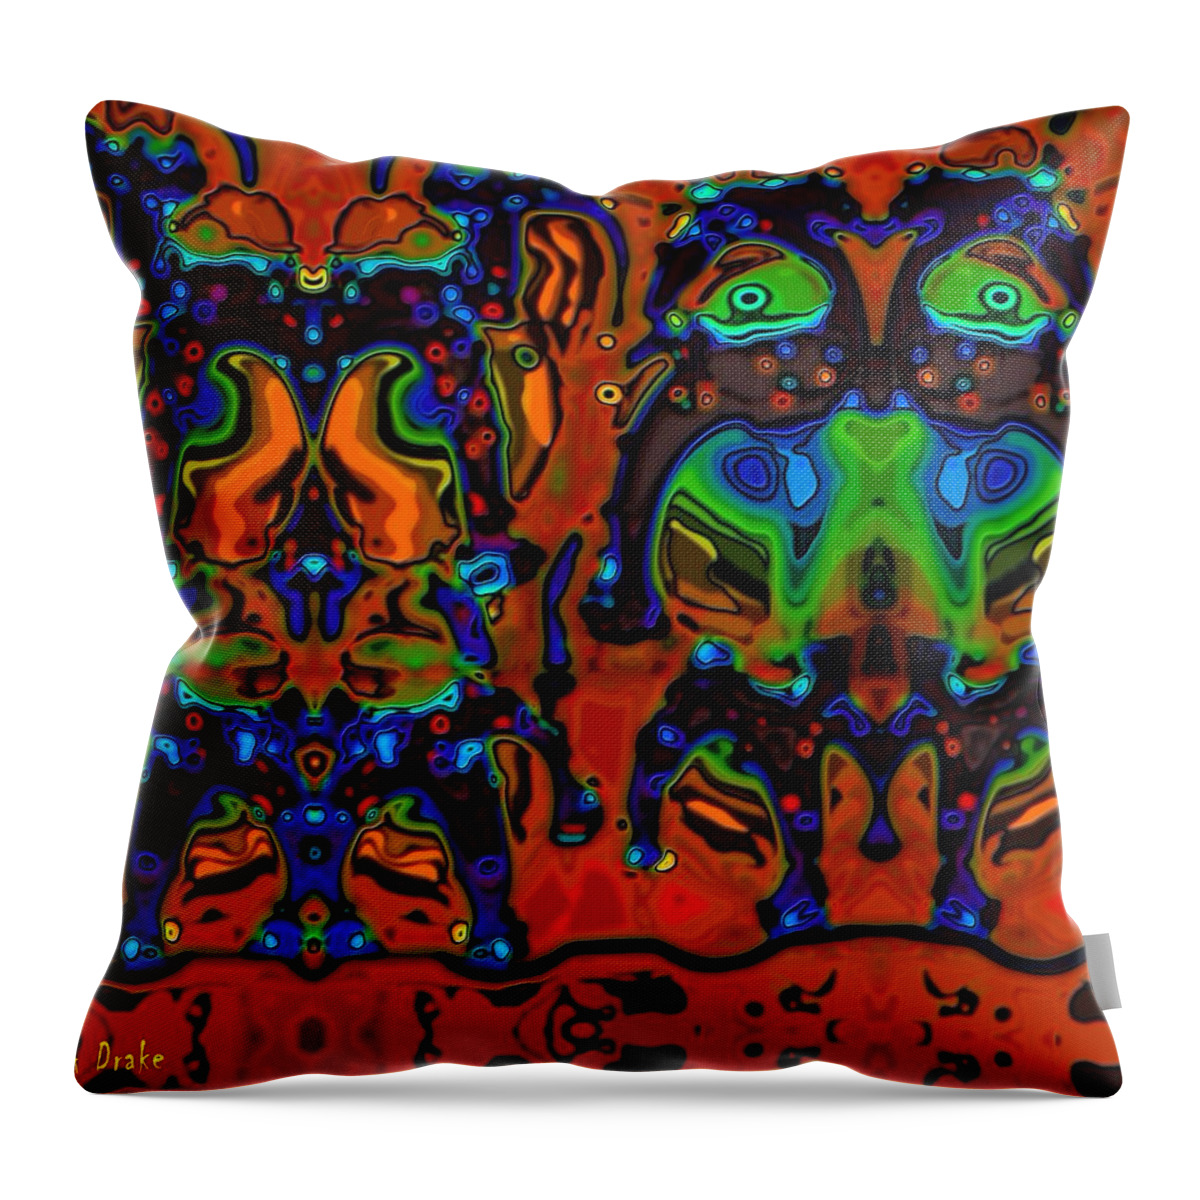 Wedding Throw Pillow featuring the digital art The Bride and Groom on Venus by Alec Drake